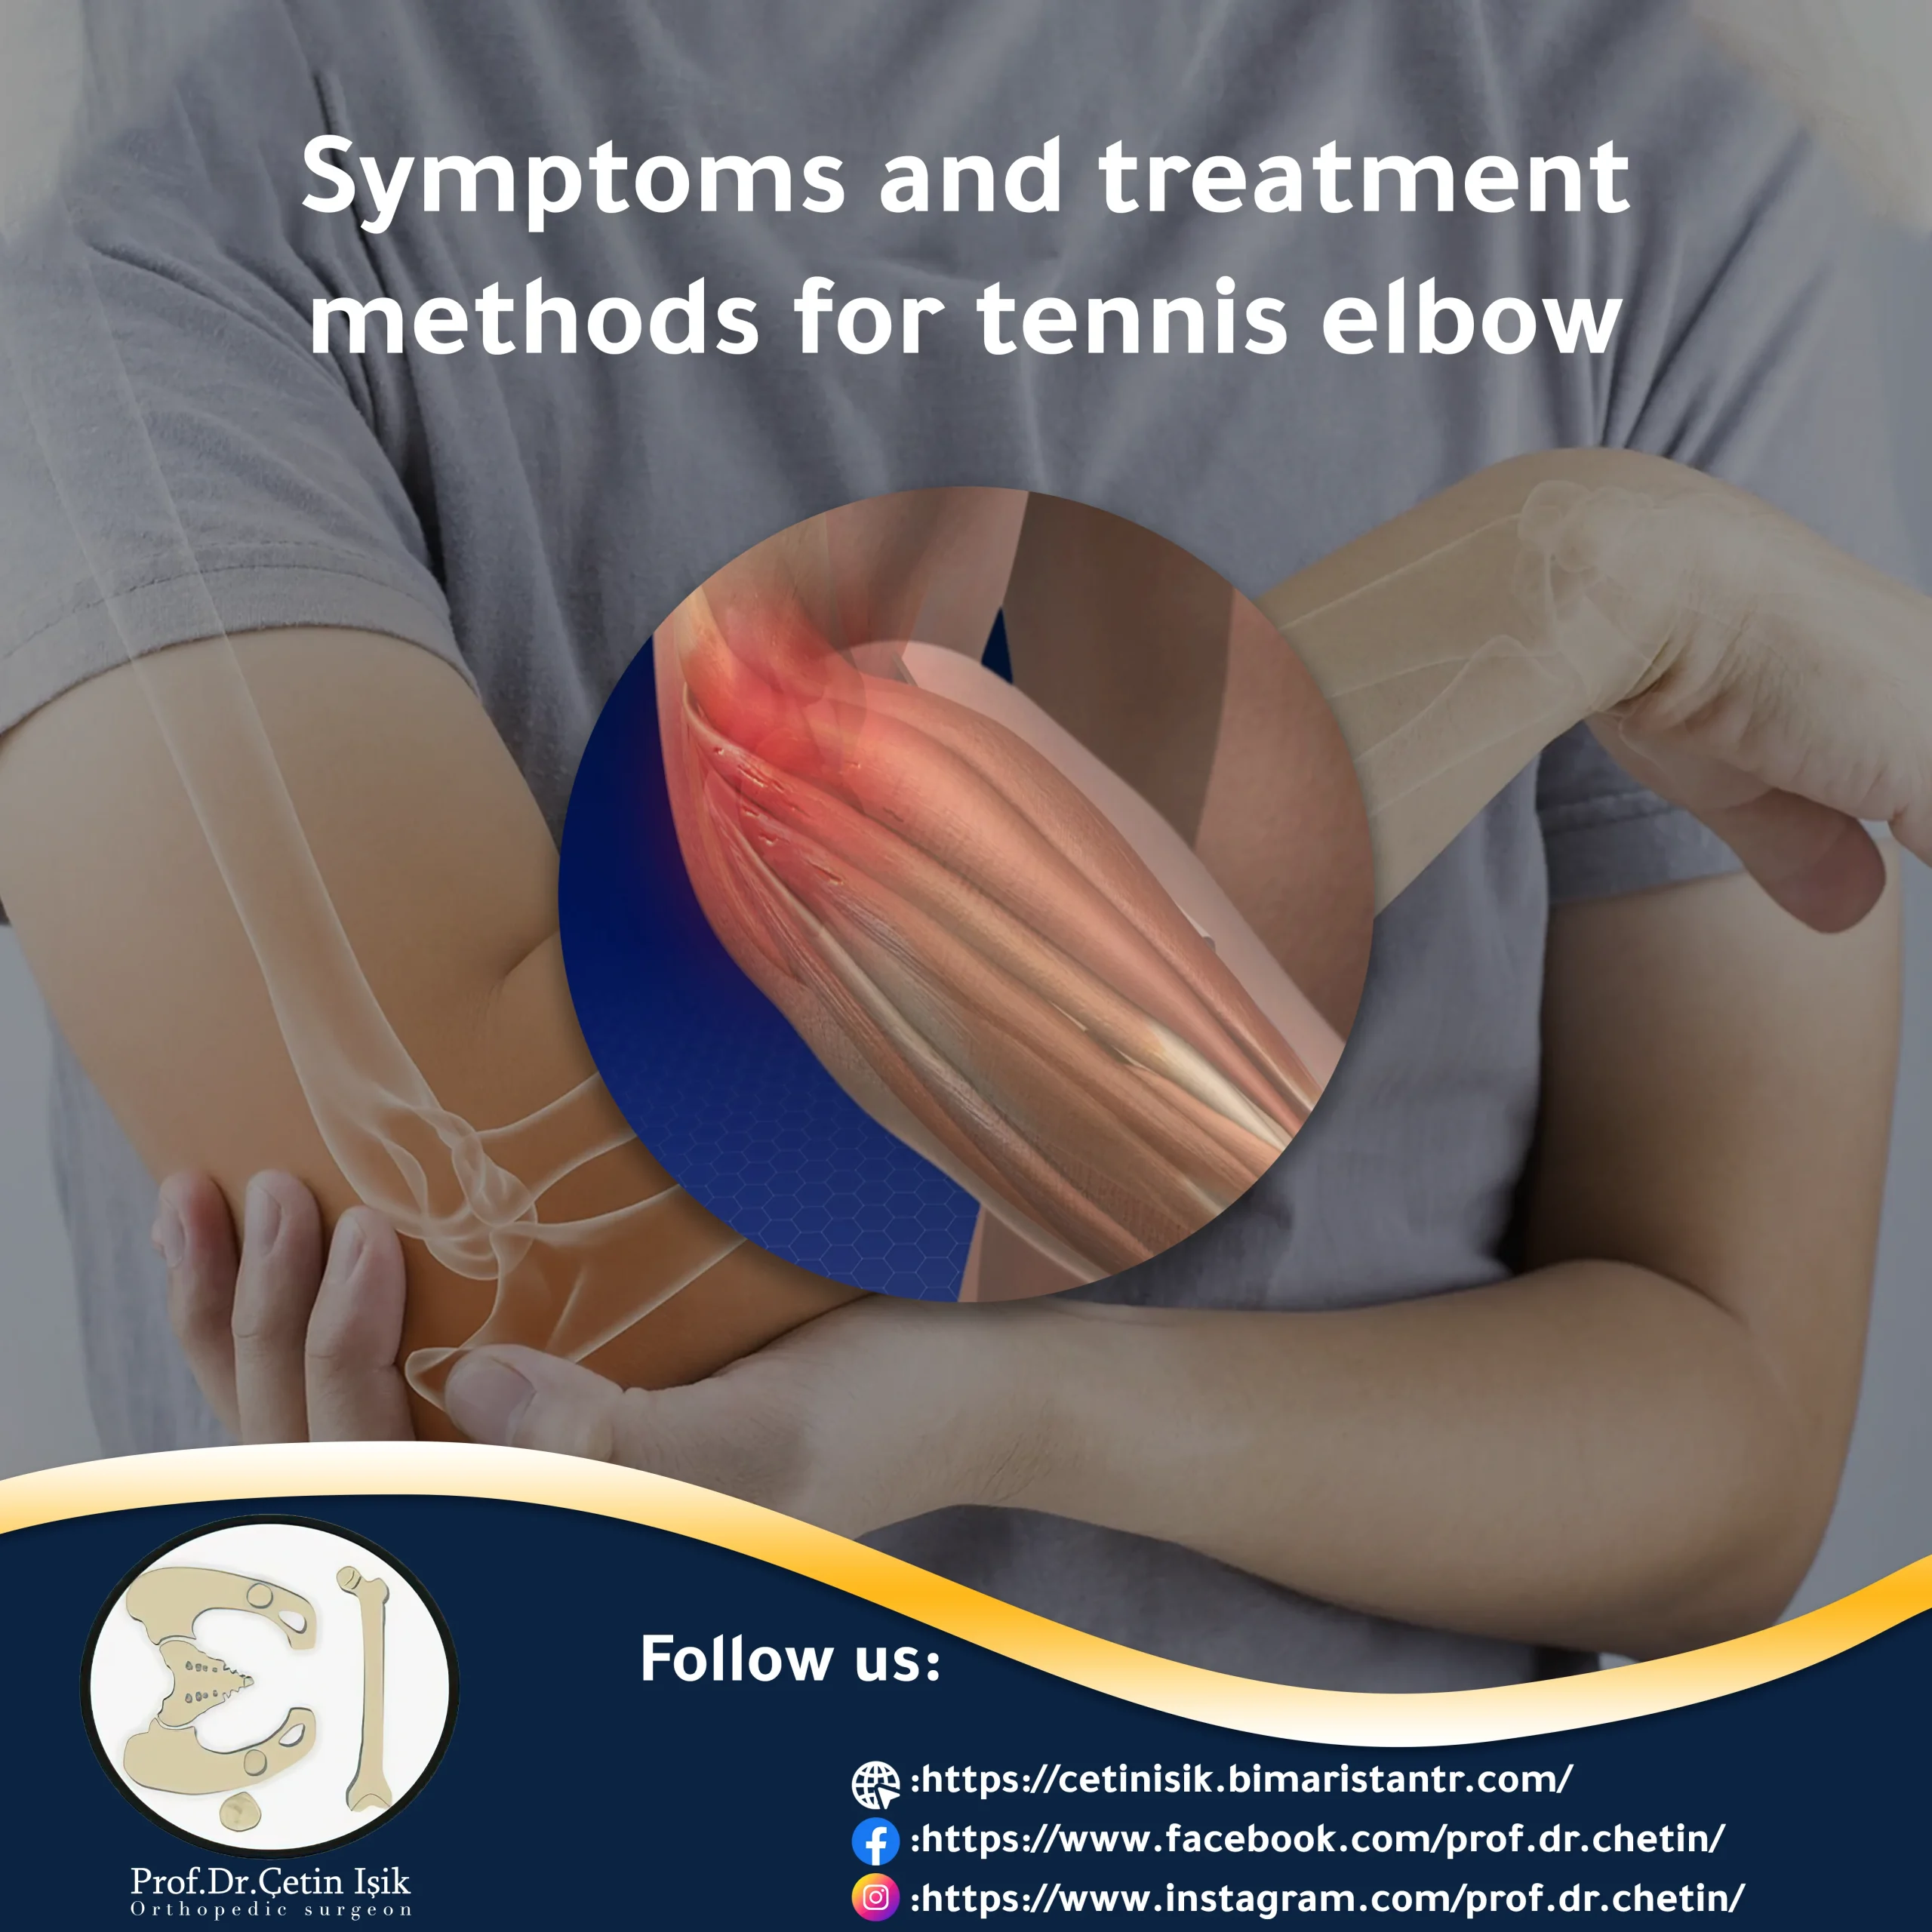 Picture of an article on the symptoms and treatment of tennis elbow